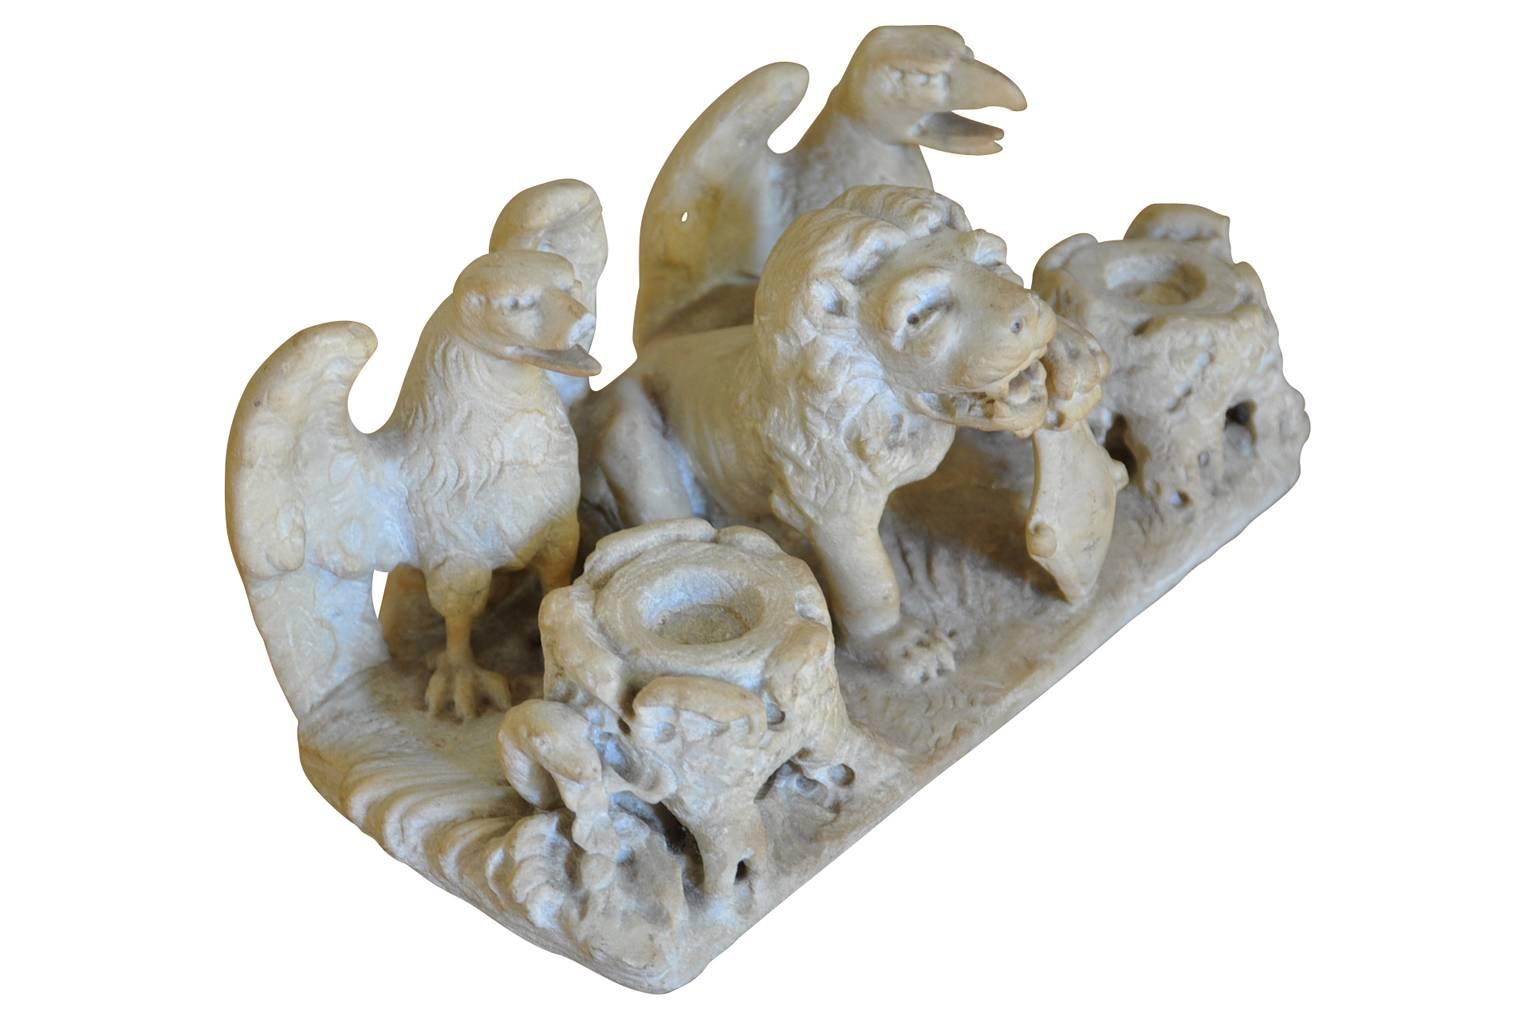 A sensational mid-18th century inkwell from the Veneto region of Italy. Masterfully carved from marble with two eagles and a stately lion holding a shield. A wonderfully accessory for any desk.